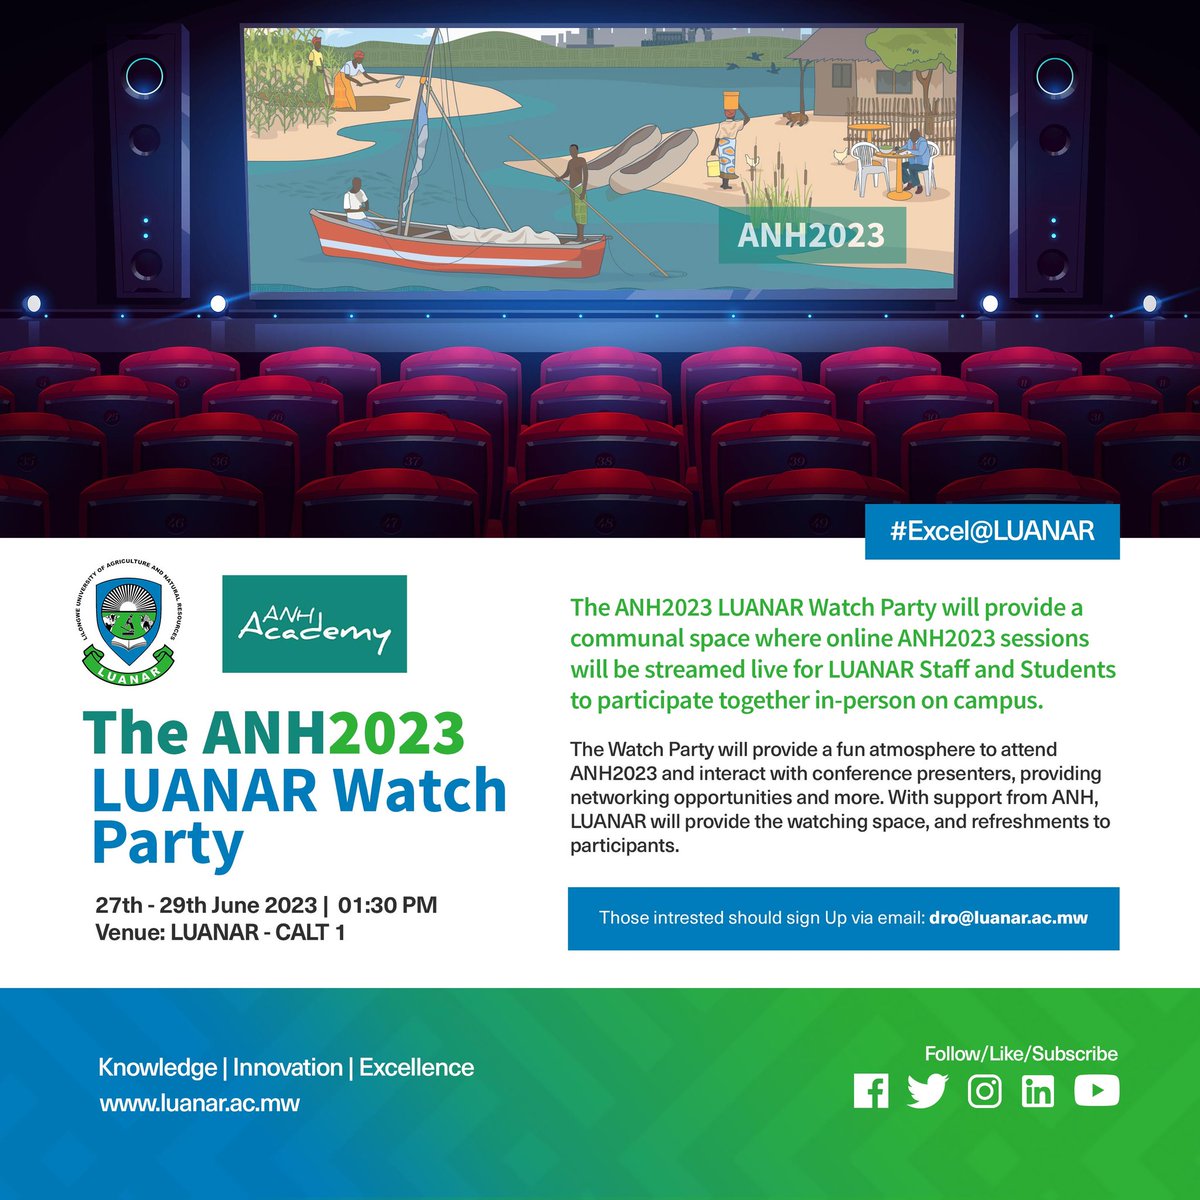 The ANH2023 LUANAR Watch Party will provide a communal space where online ANH2023 sessions will be streamed live for LUANAR Staff and Students to participate together in-person on campus. The Watch Party will provide a fun atmosphere to attend ANH2023 and interact with conference…